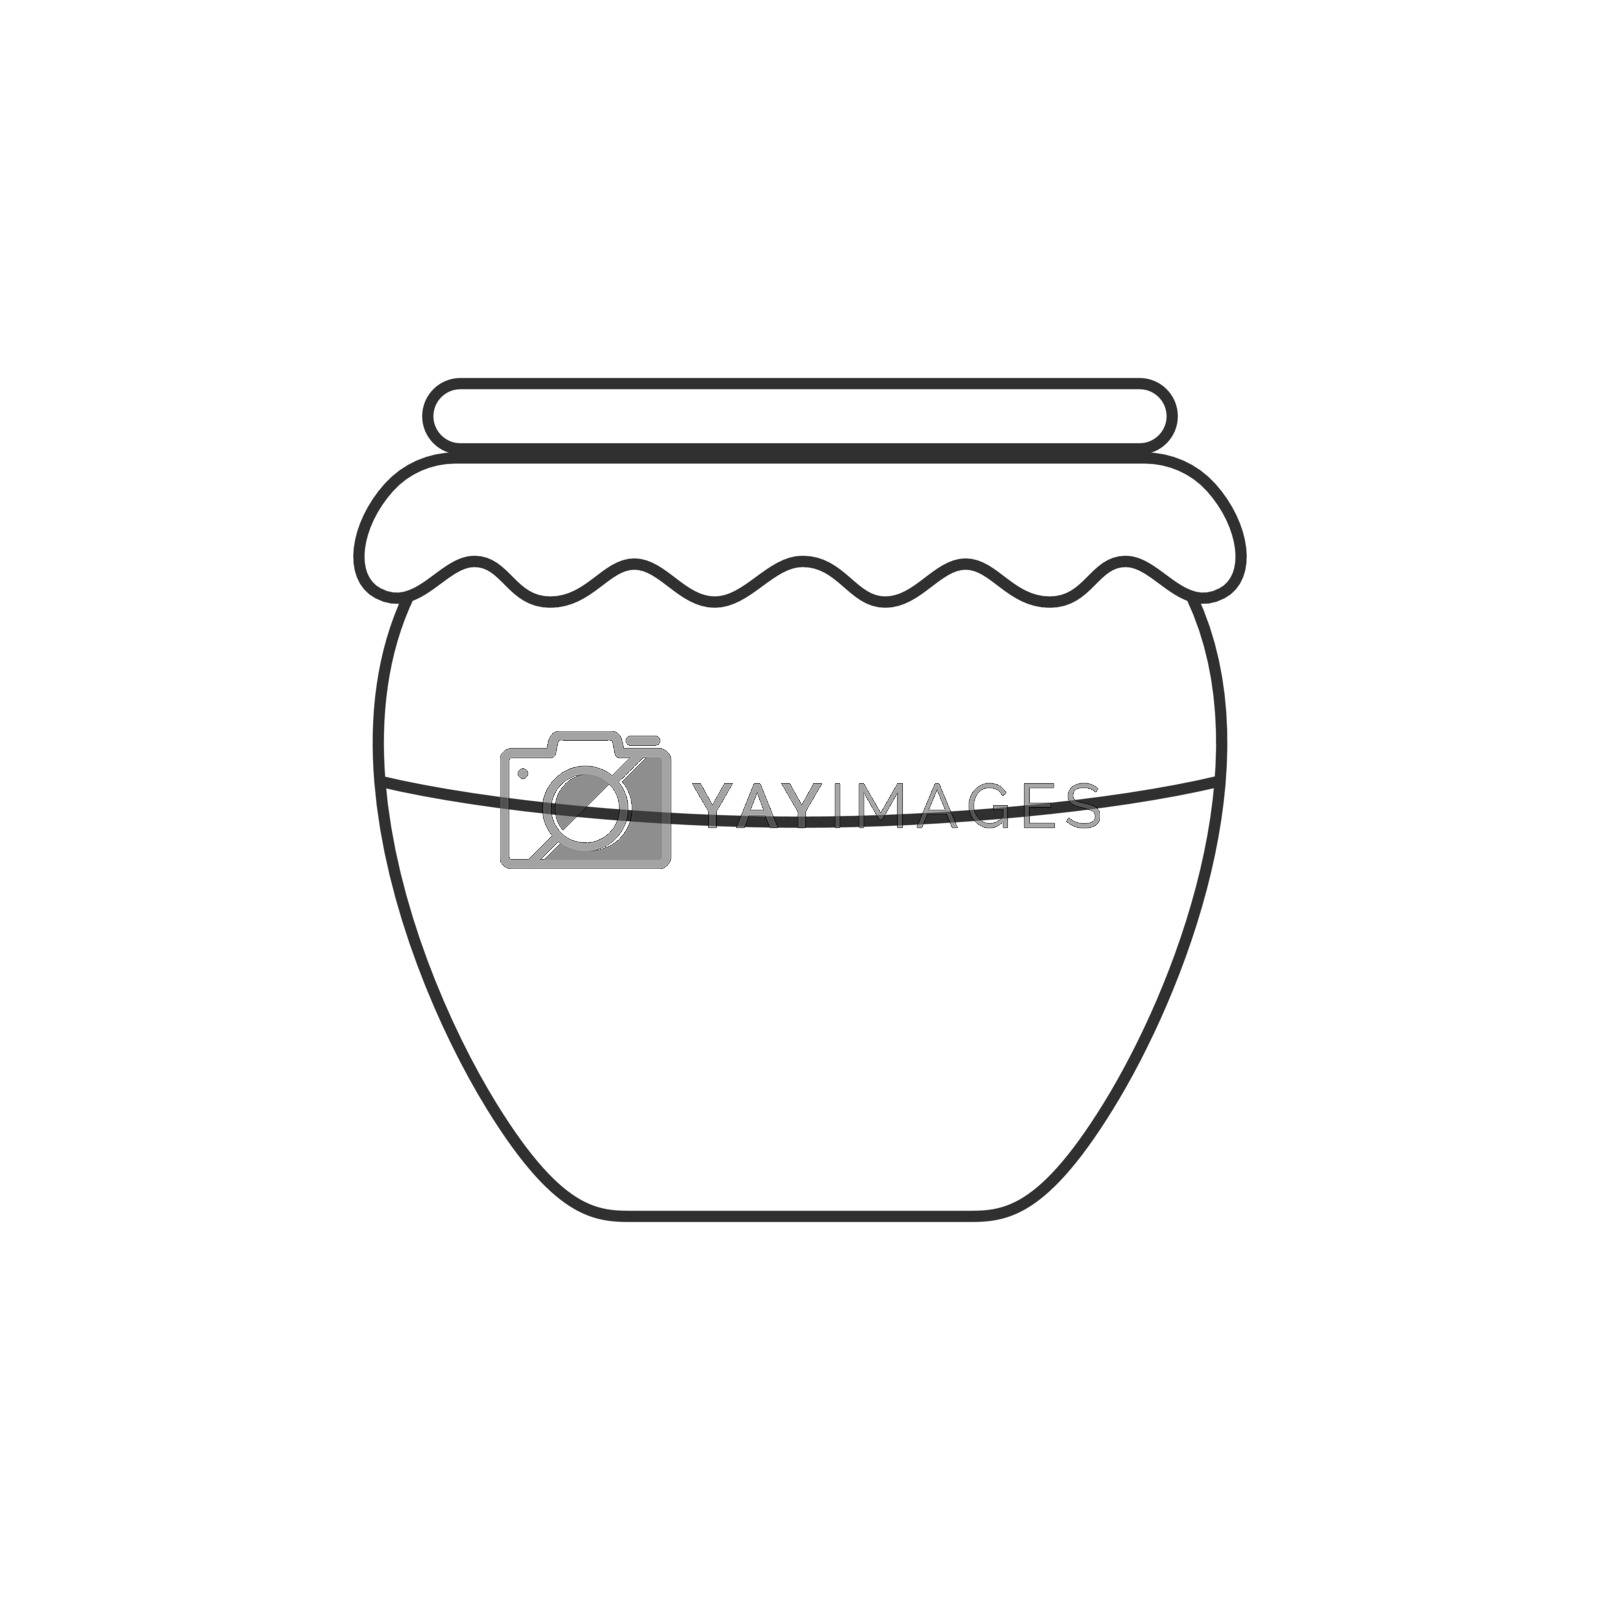 Royalty free image of Honey jar icon in black flat outline design by wavemovies